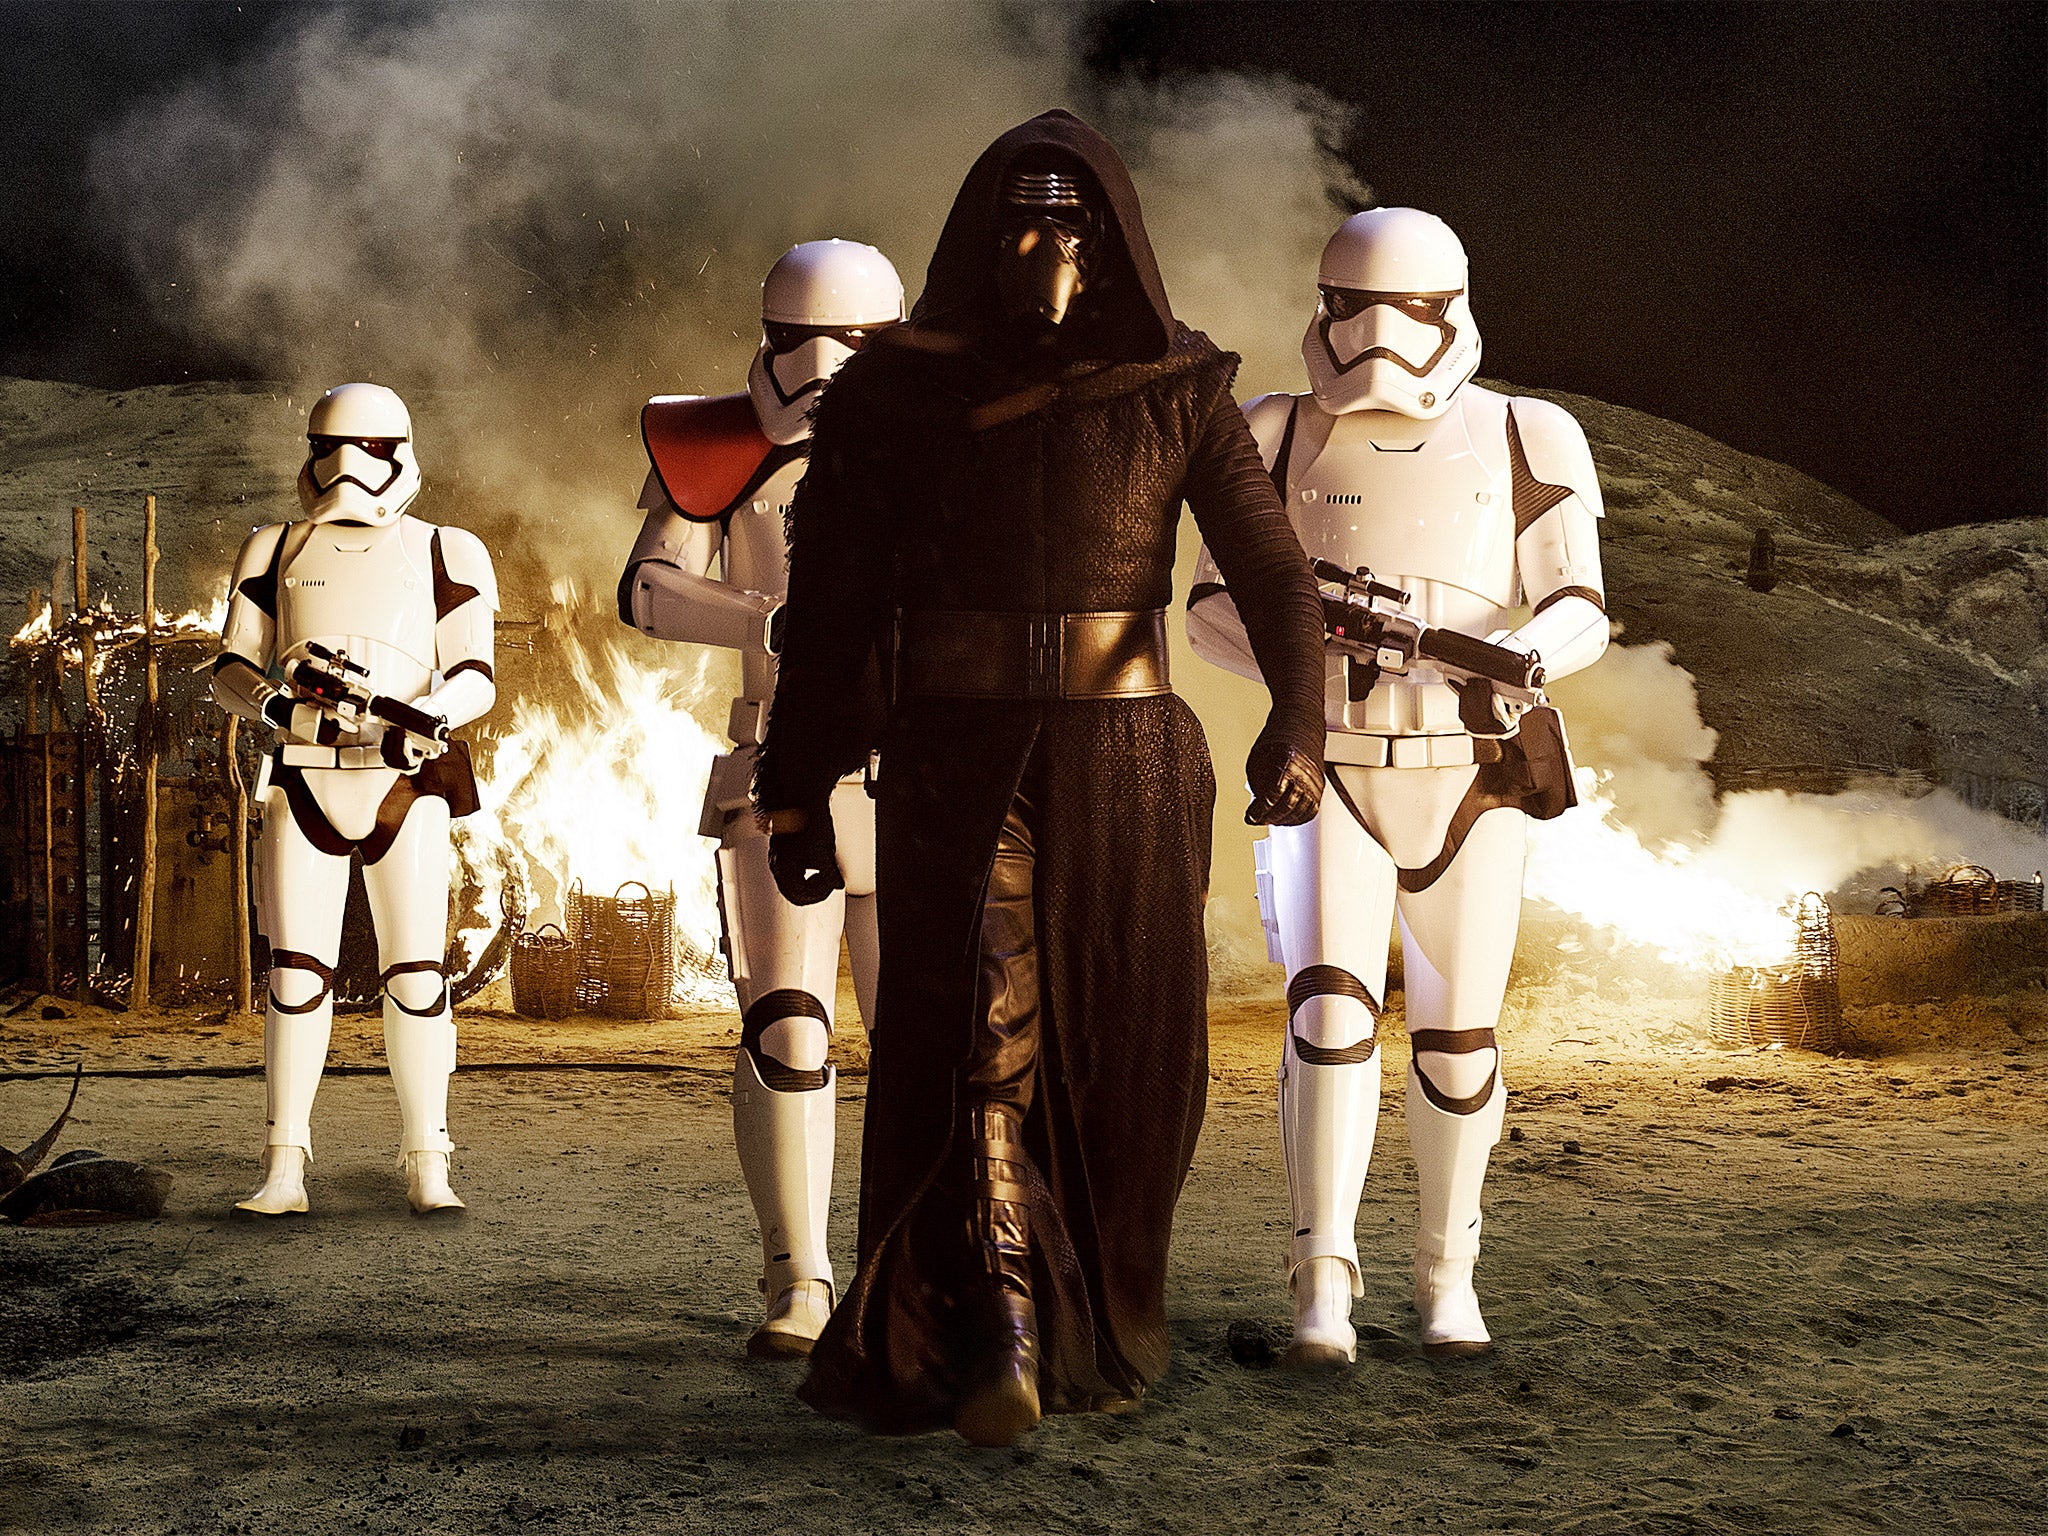 ‘The Force Awakens’ has broken box office records around the world